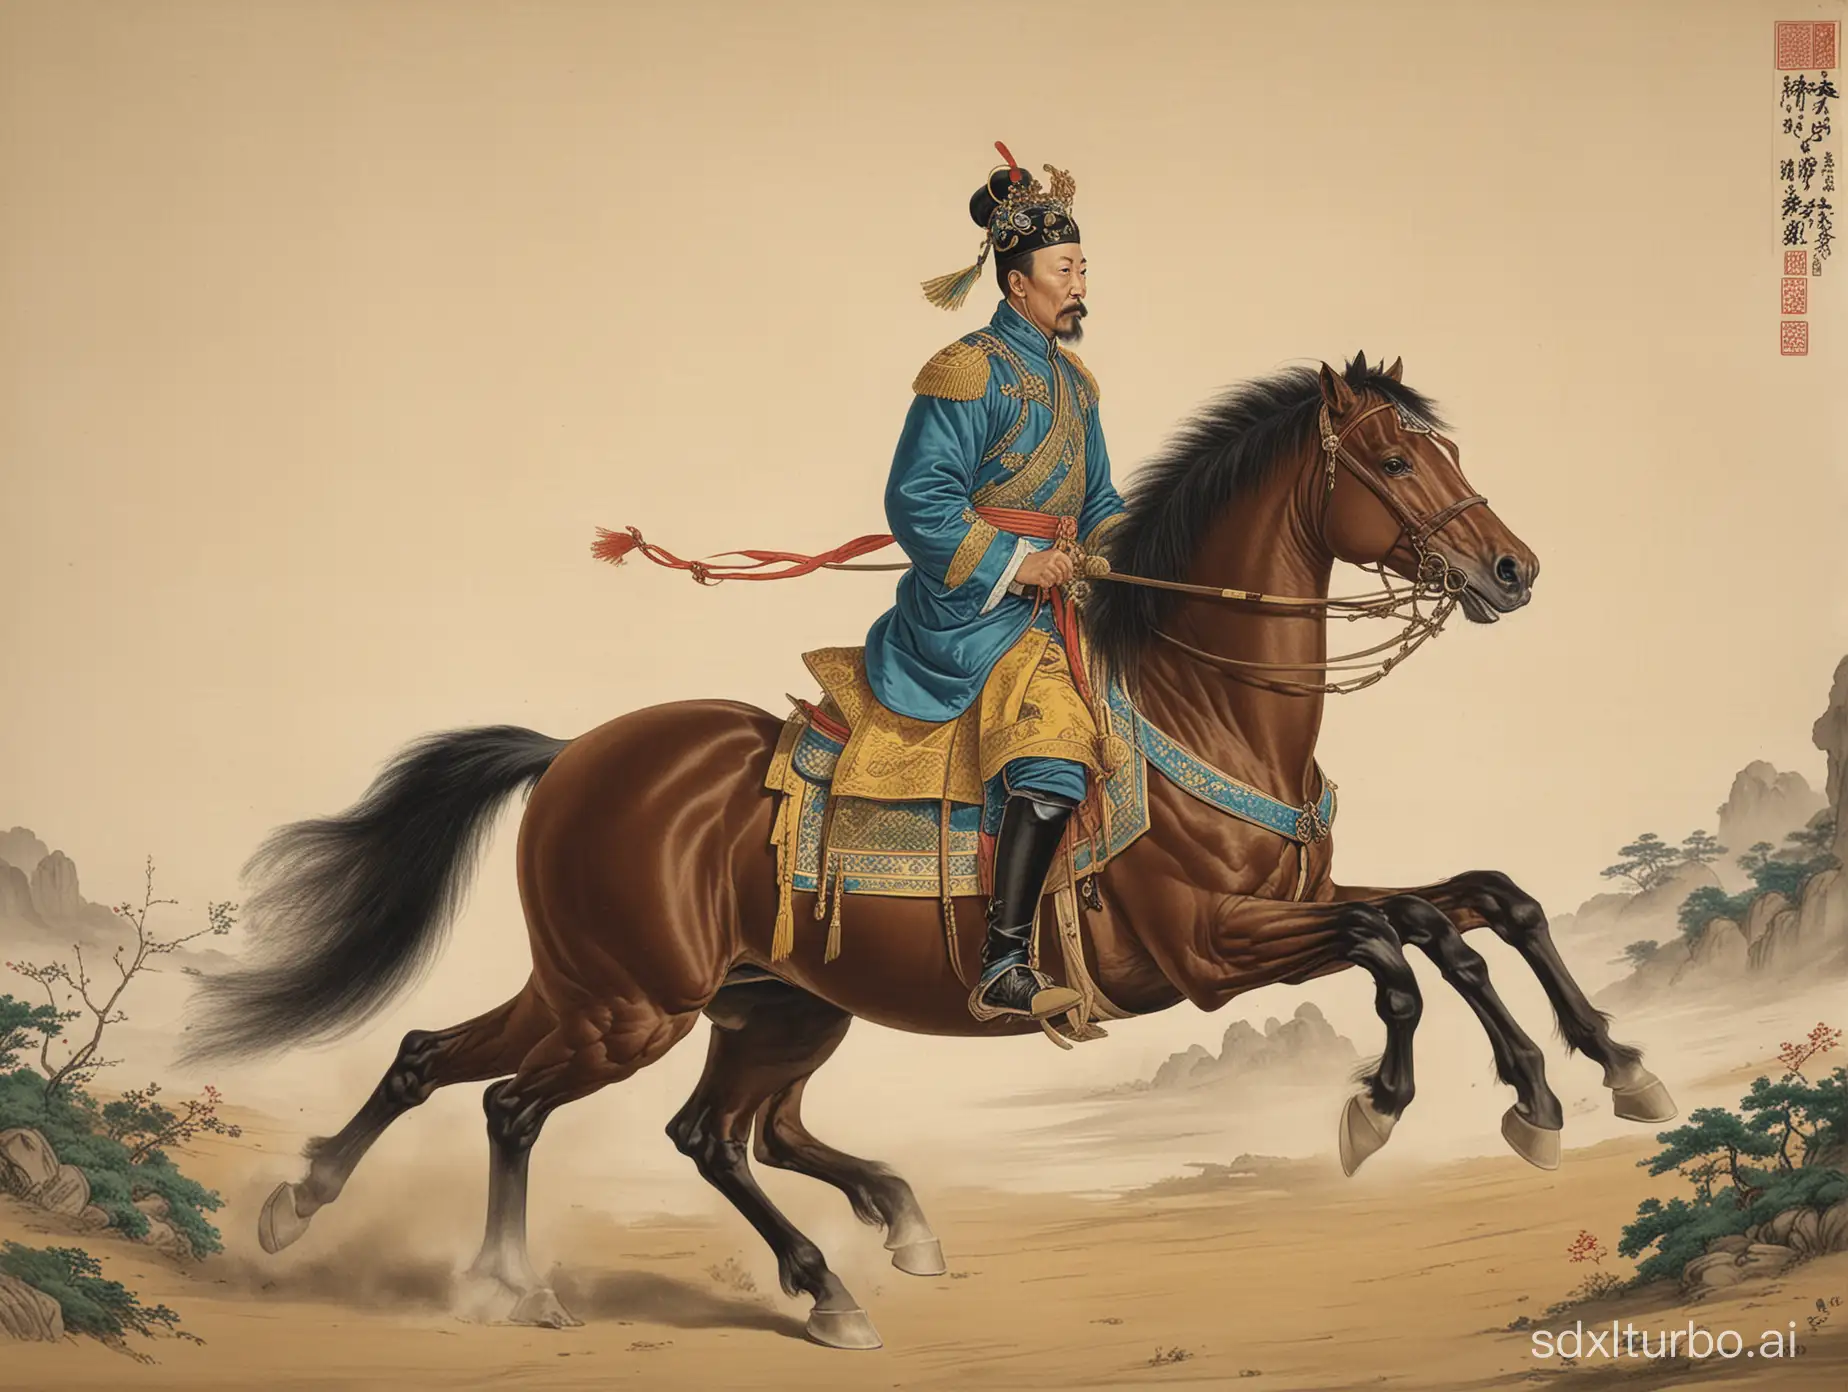 A general of the Qing Dynasty rides on horseback.